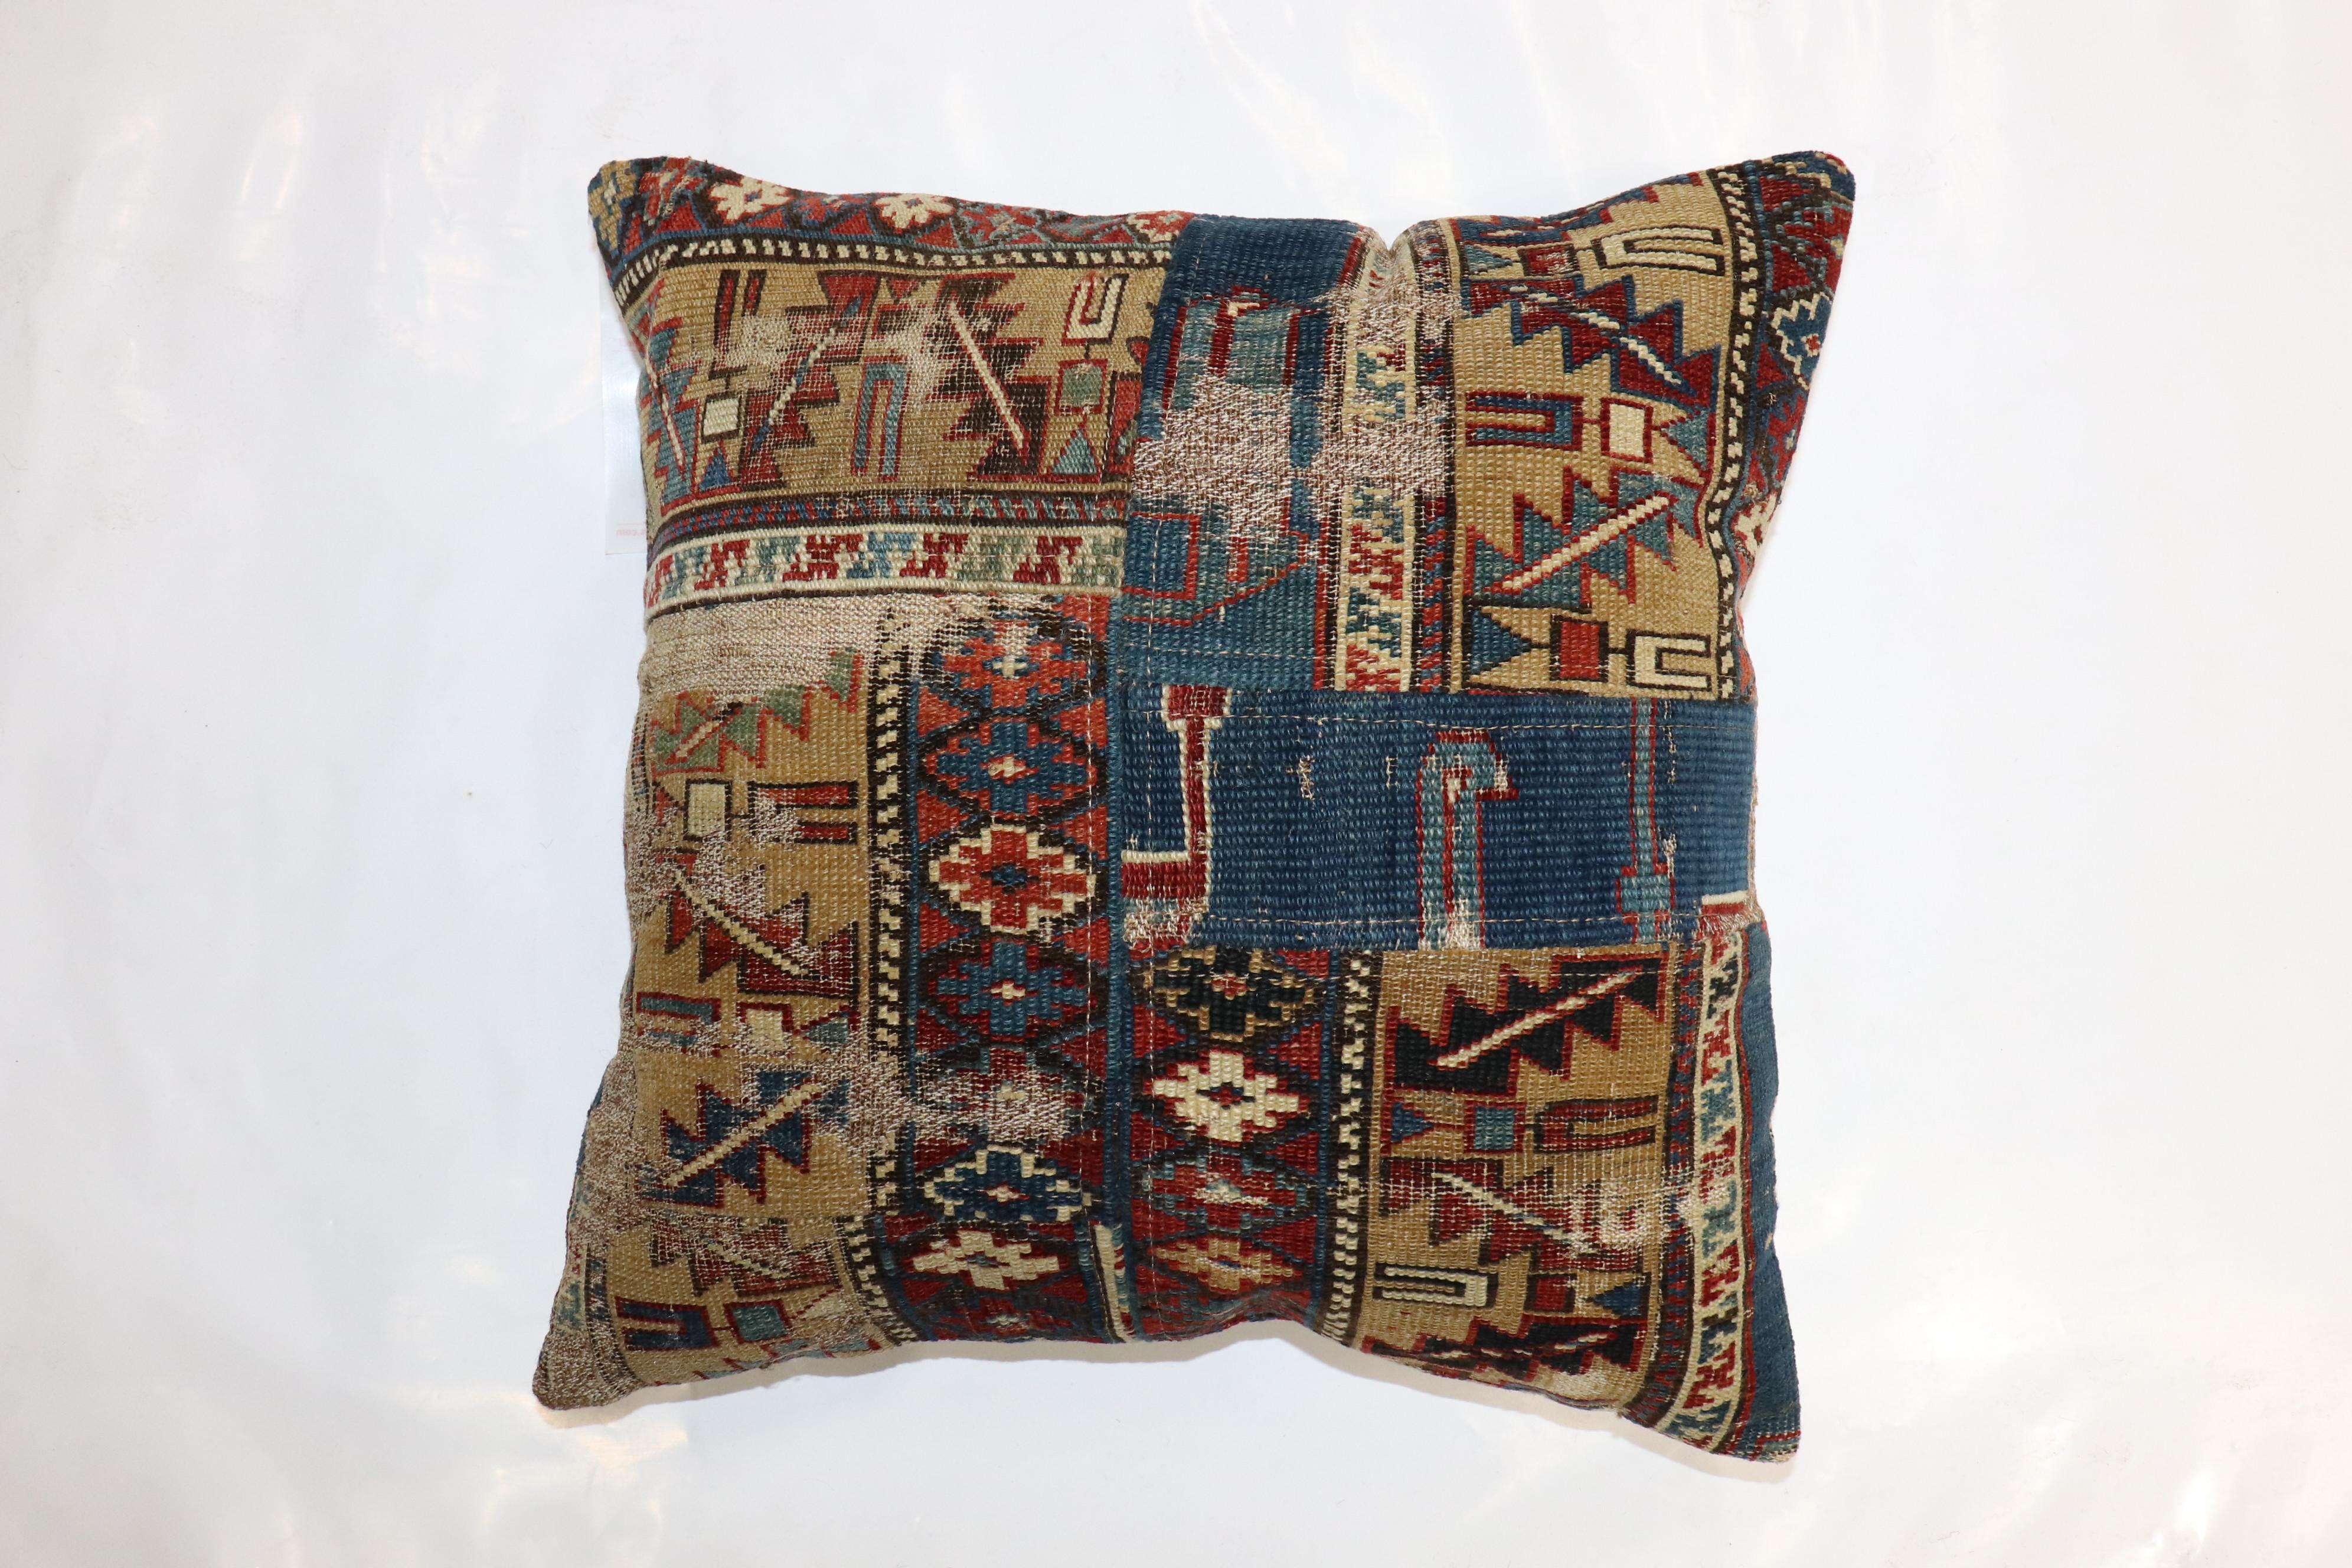 Pillow made from a 19th-century Caucasian rug done in a patchwork format with cotton back and zipper closure included.

Measures: 18'' x 18''.